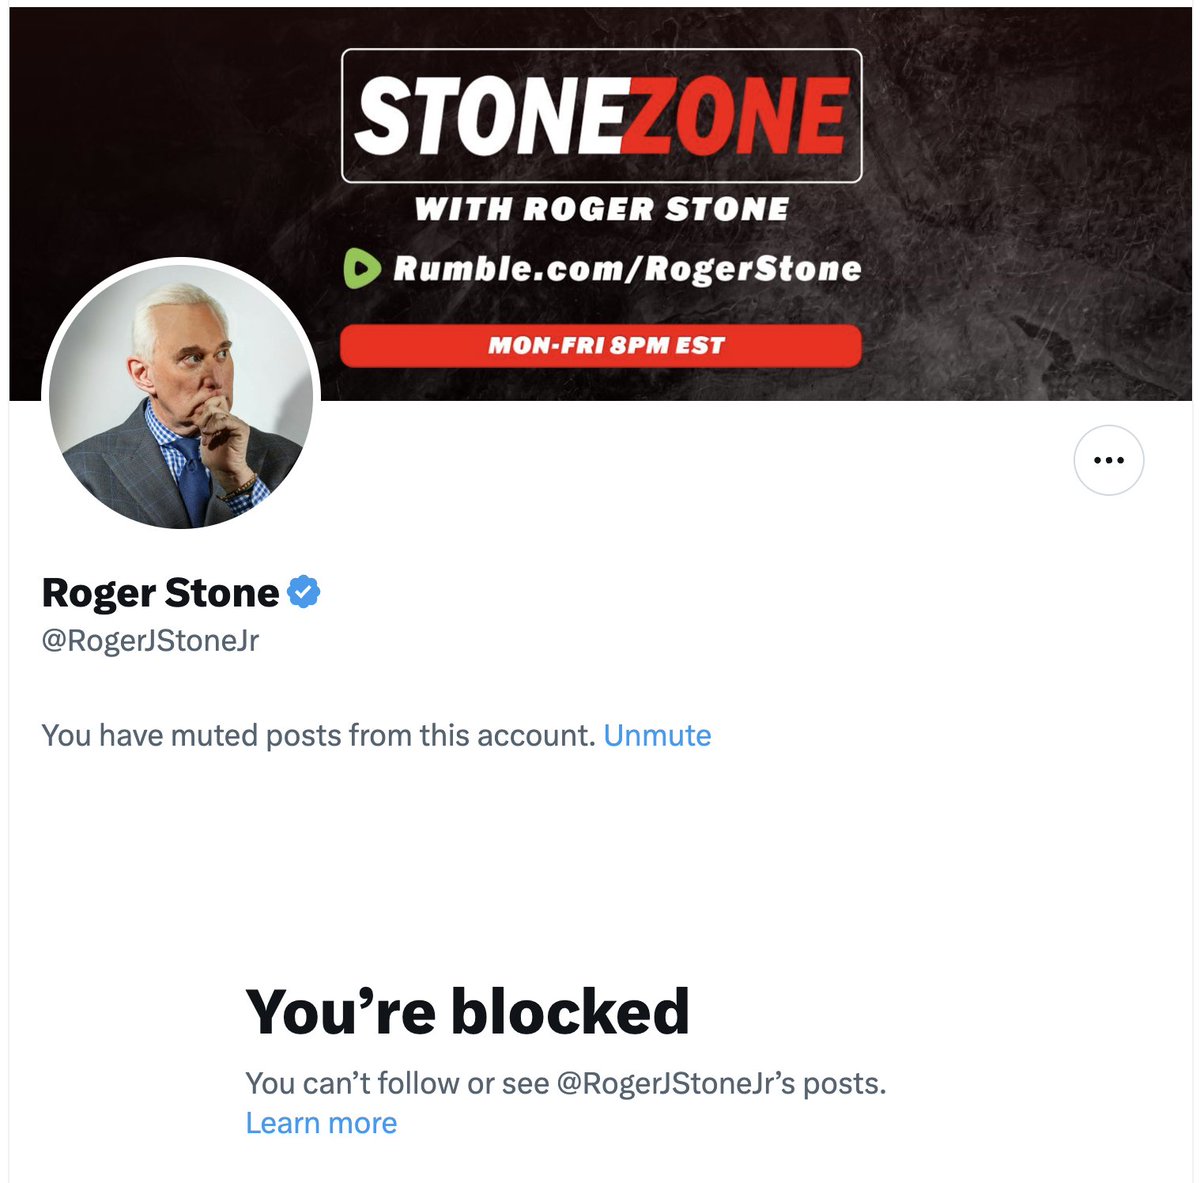 Must be doing something right. @rogerstone is just as thin-skinned as his orange boss.